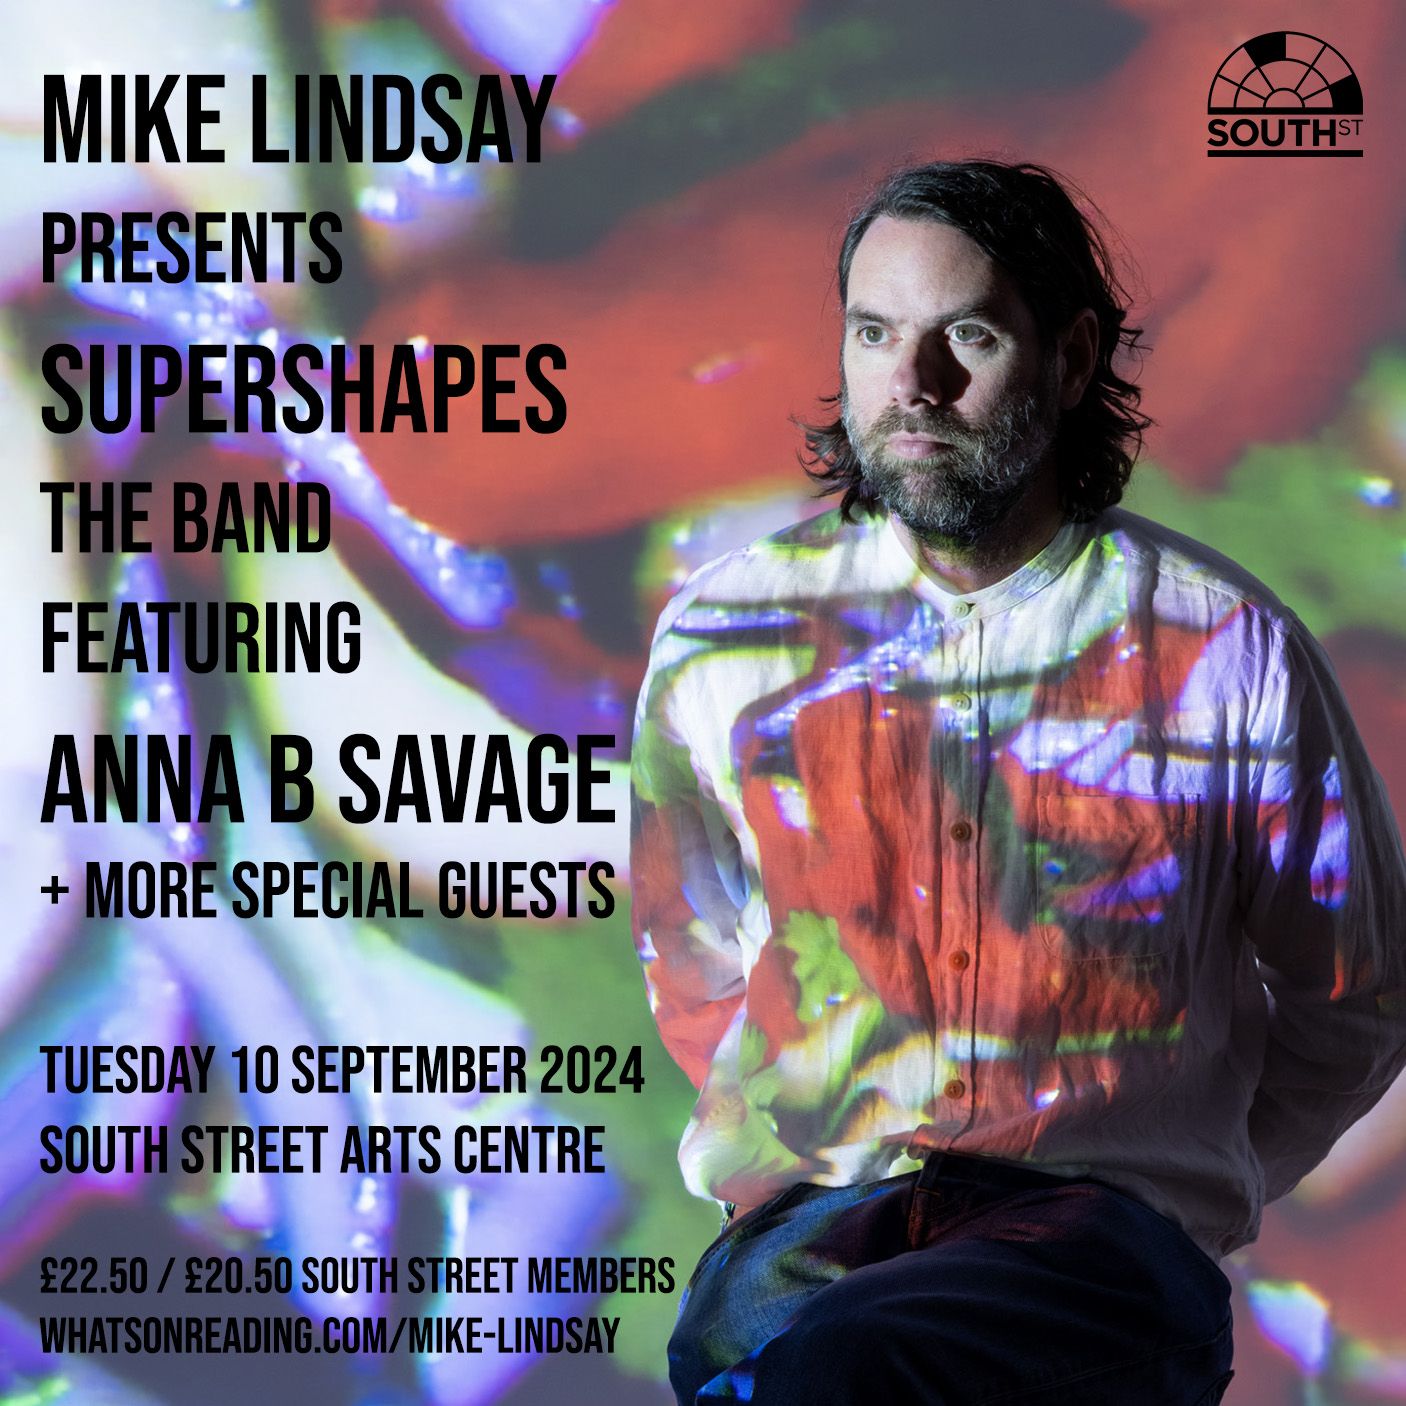 South Street: Mike Lindsey presents Supershapes